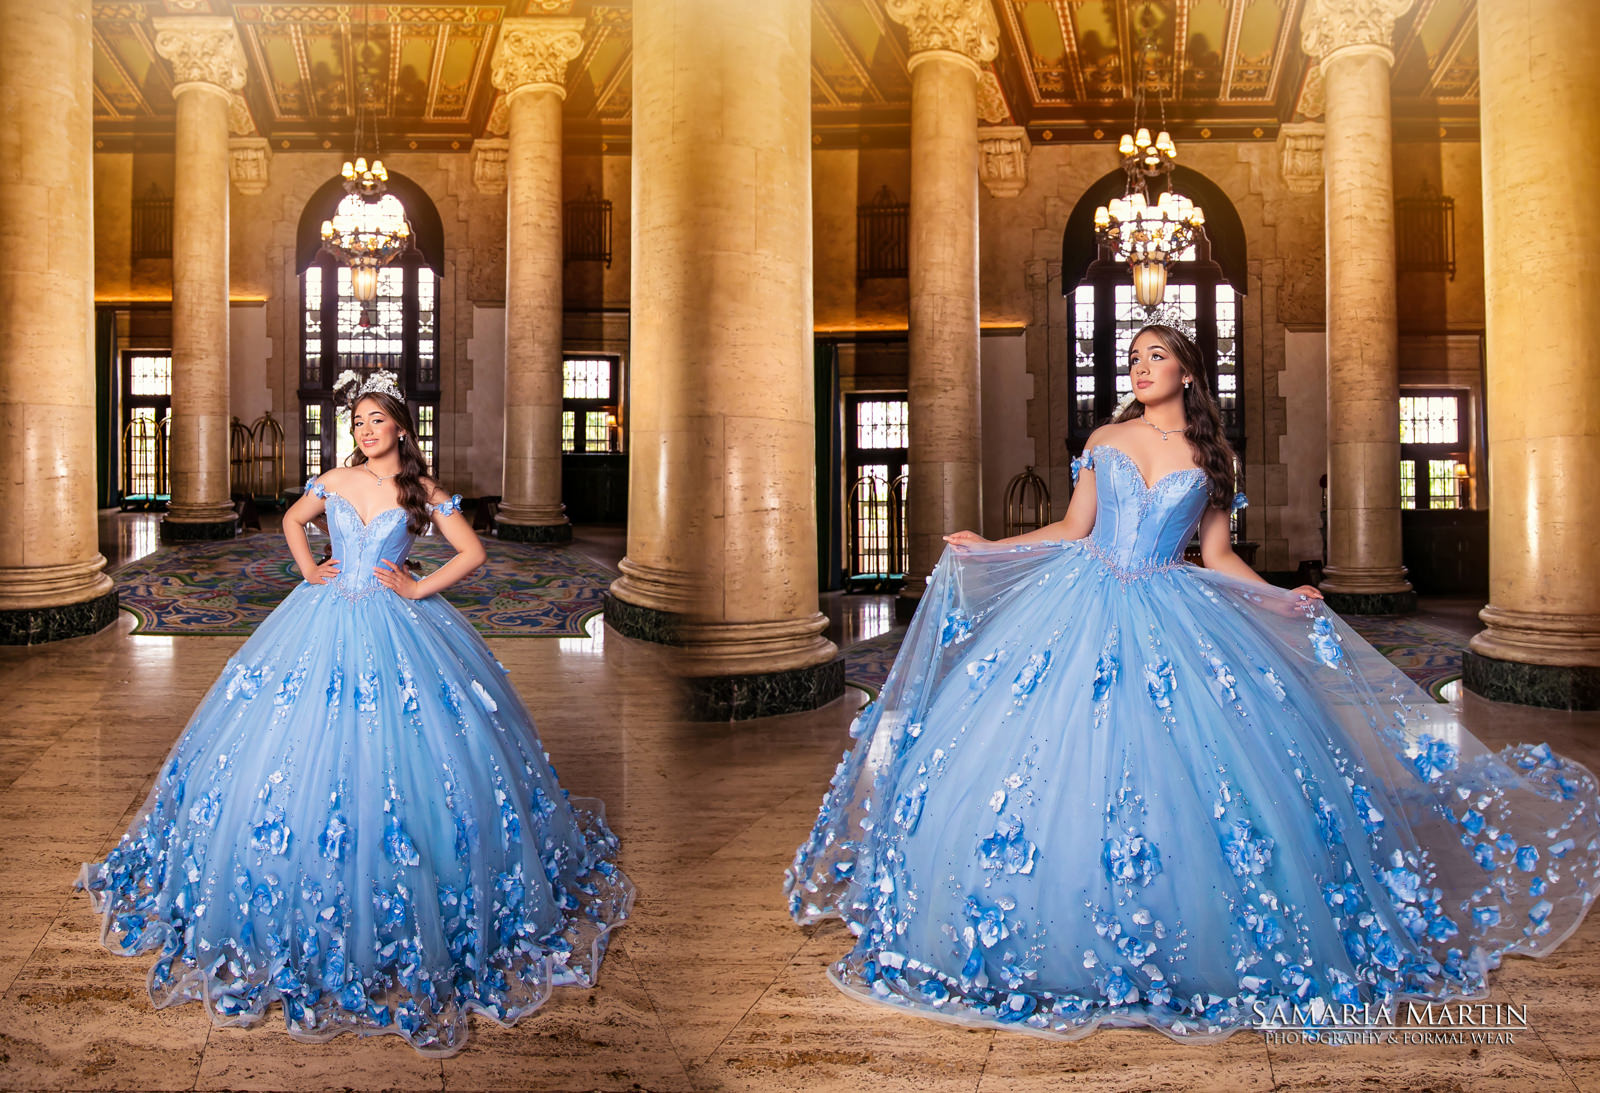 Miami quince photography ,Quinceanera photoshoot ideas